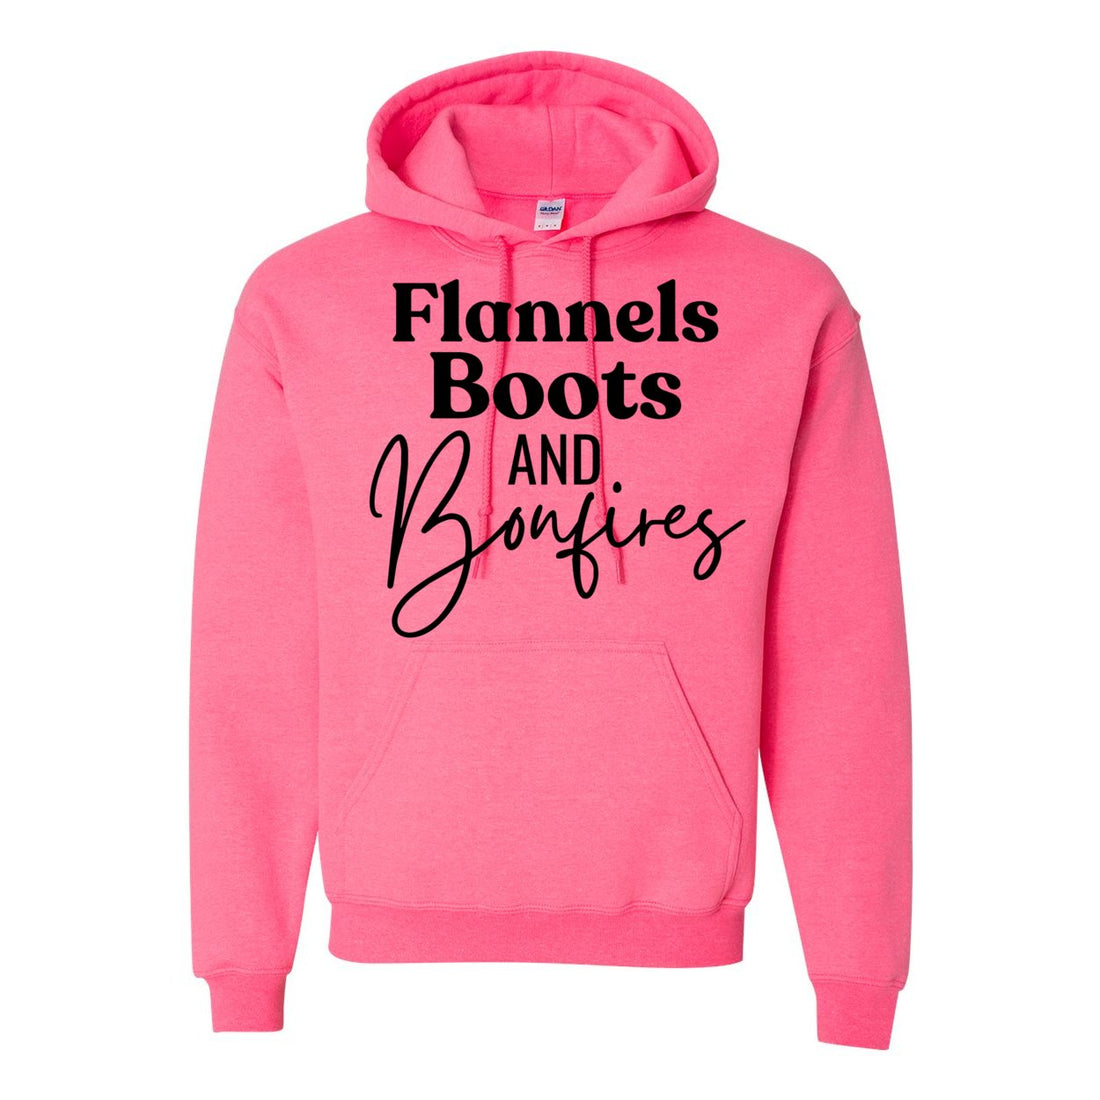 Flannels Boots & Bonfires Hooded Sweatshirt - Sweaters/Hoodies - Positively Sassy - Flannels Boots & Bonfires Hooded Sweatshirt